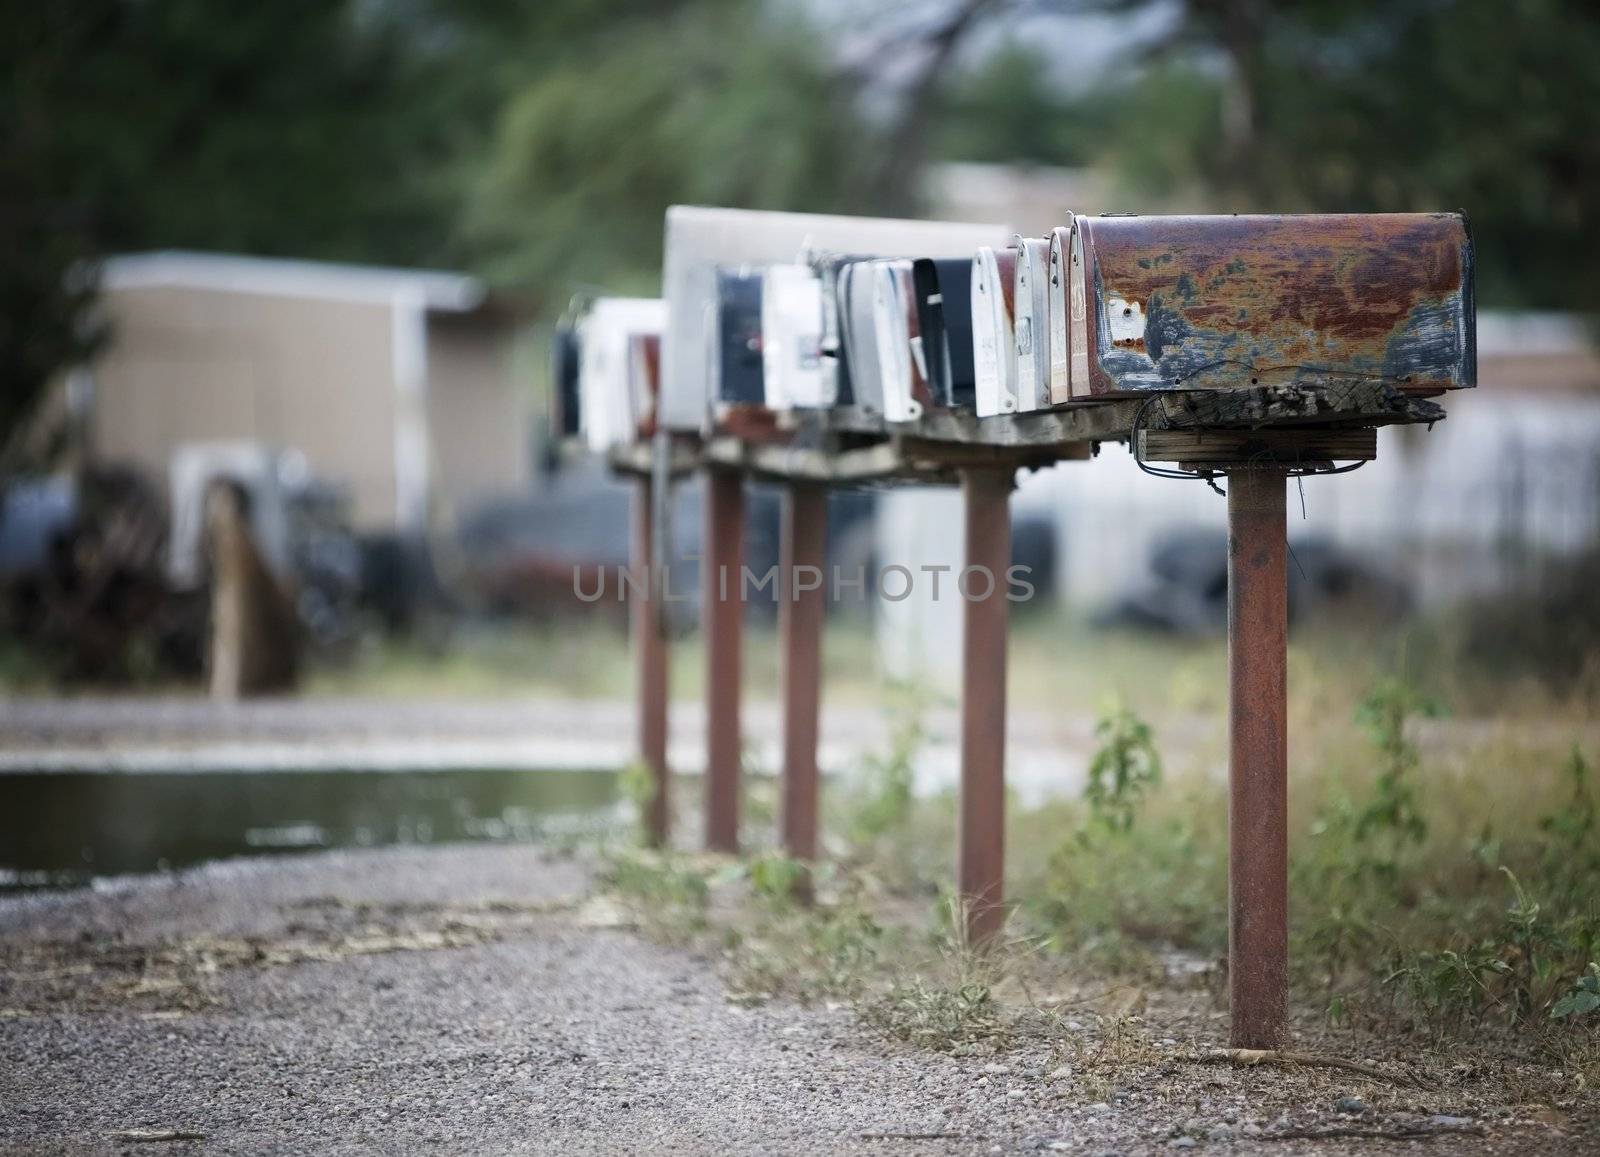 Rural mailboxes in a row alongside a country road.